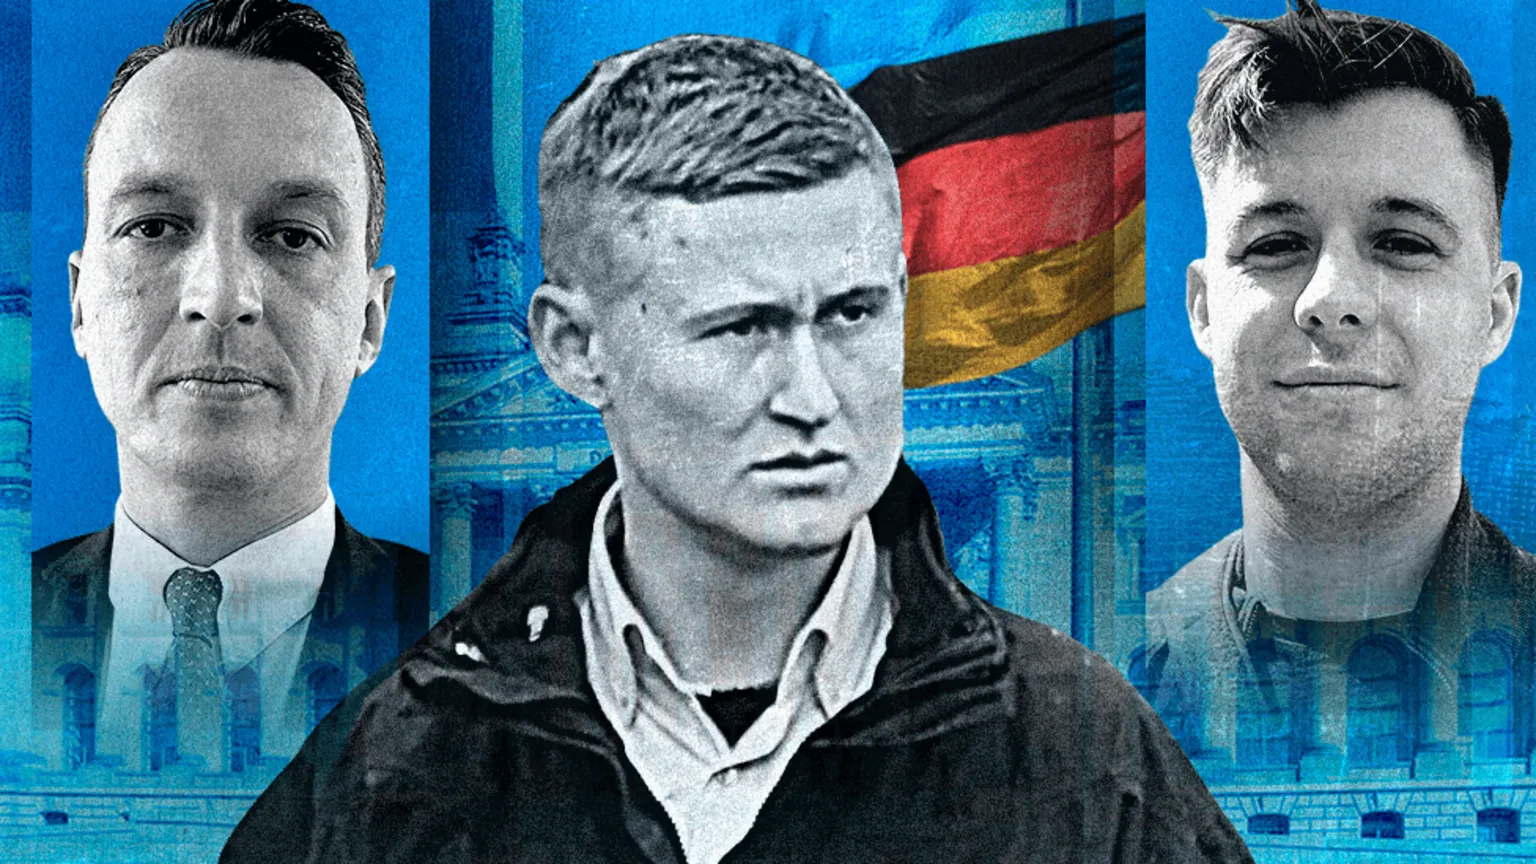 Going to the extreme: Inside Germany’s far right (bbc.com)